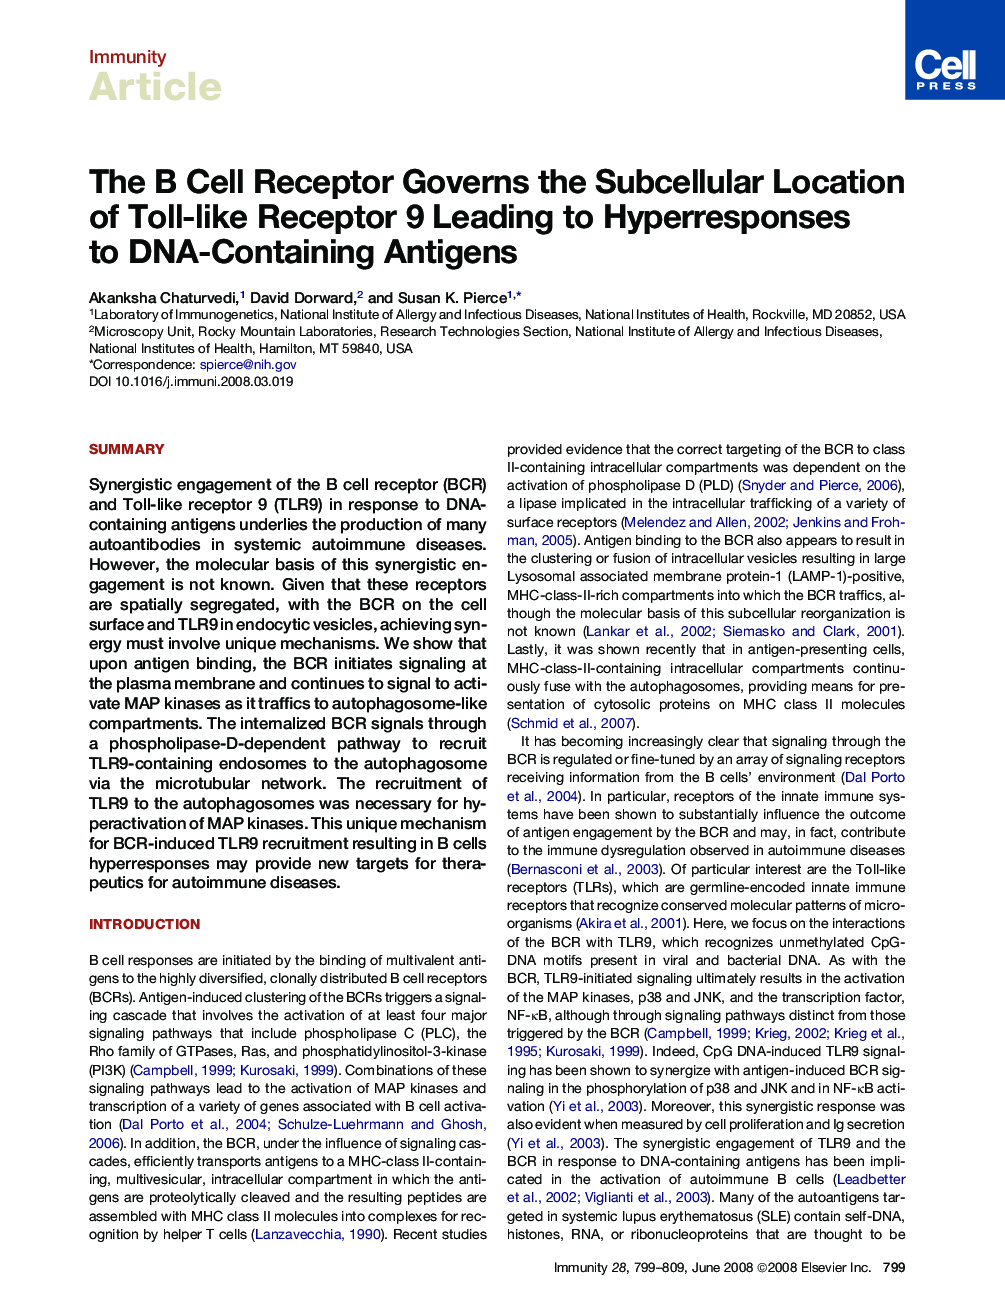 The B Cell Receptor Governs the Subcellular Location of Toll-like Receptor 9 Leading to Hyperresponses to DNA-Containing Antigens